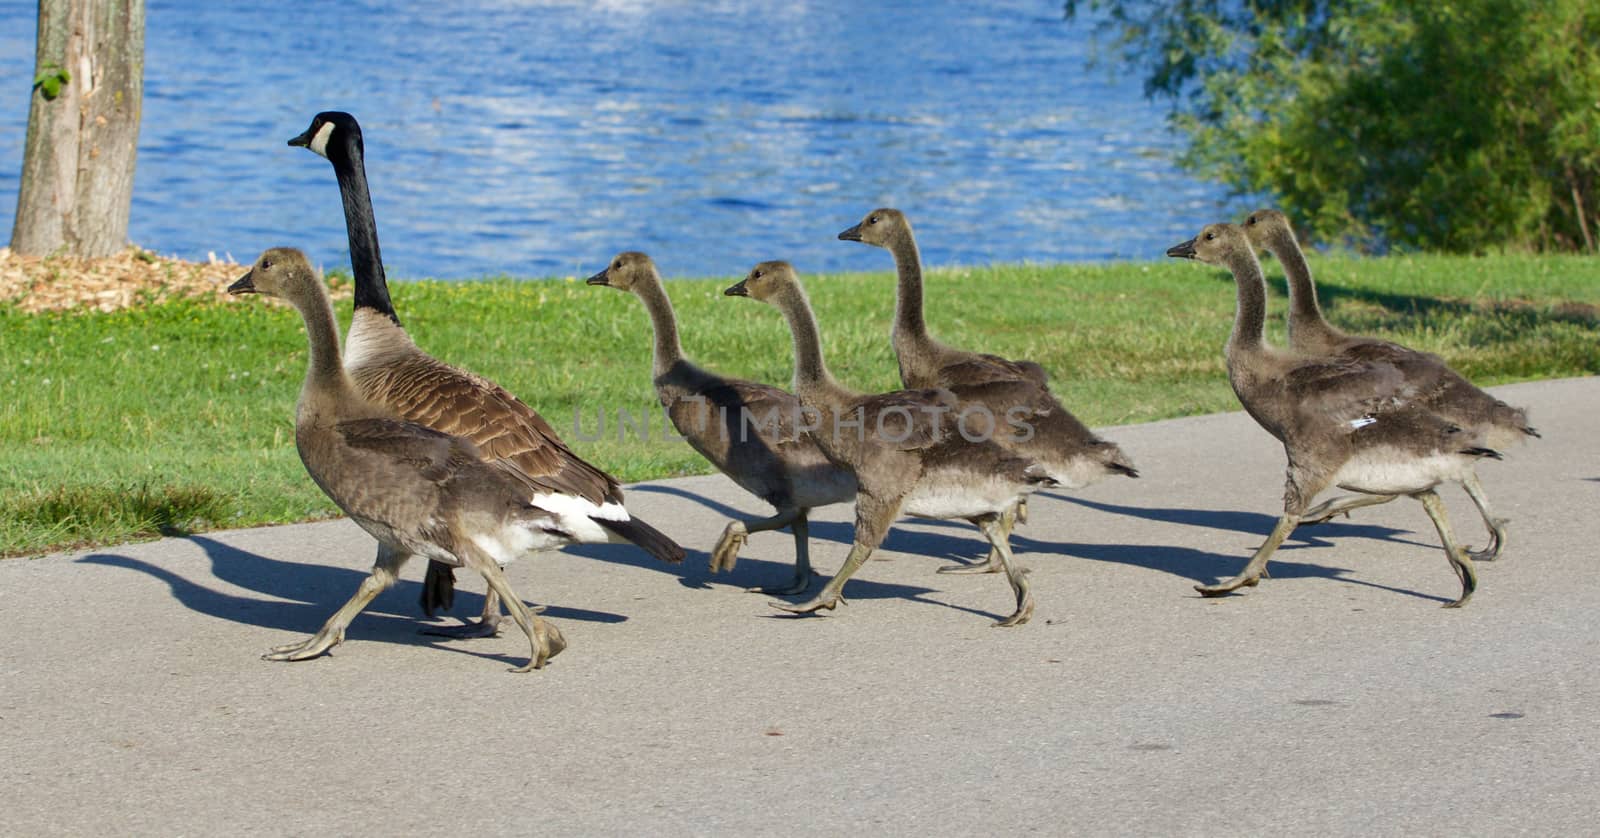 The young cackling geese are running across the road by teo